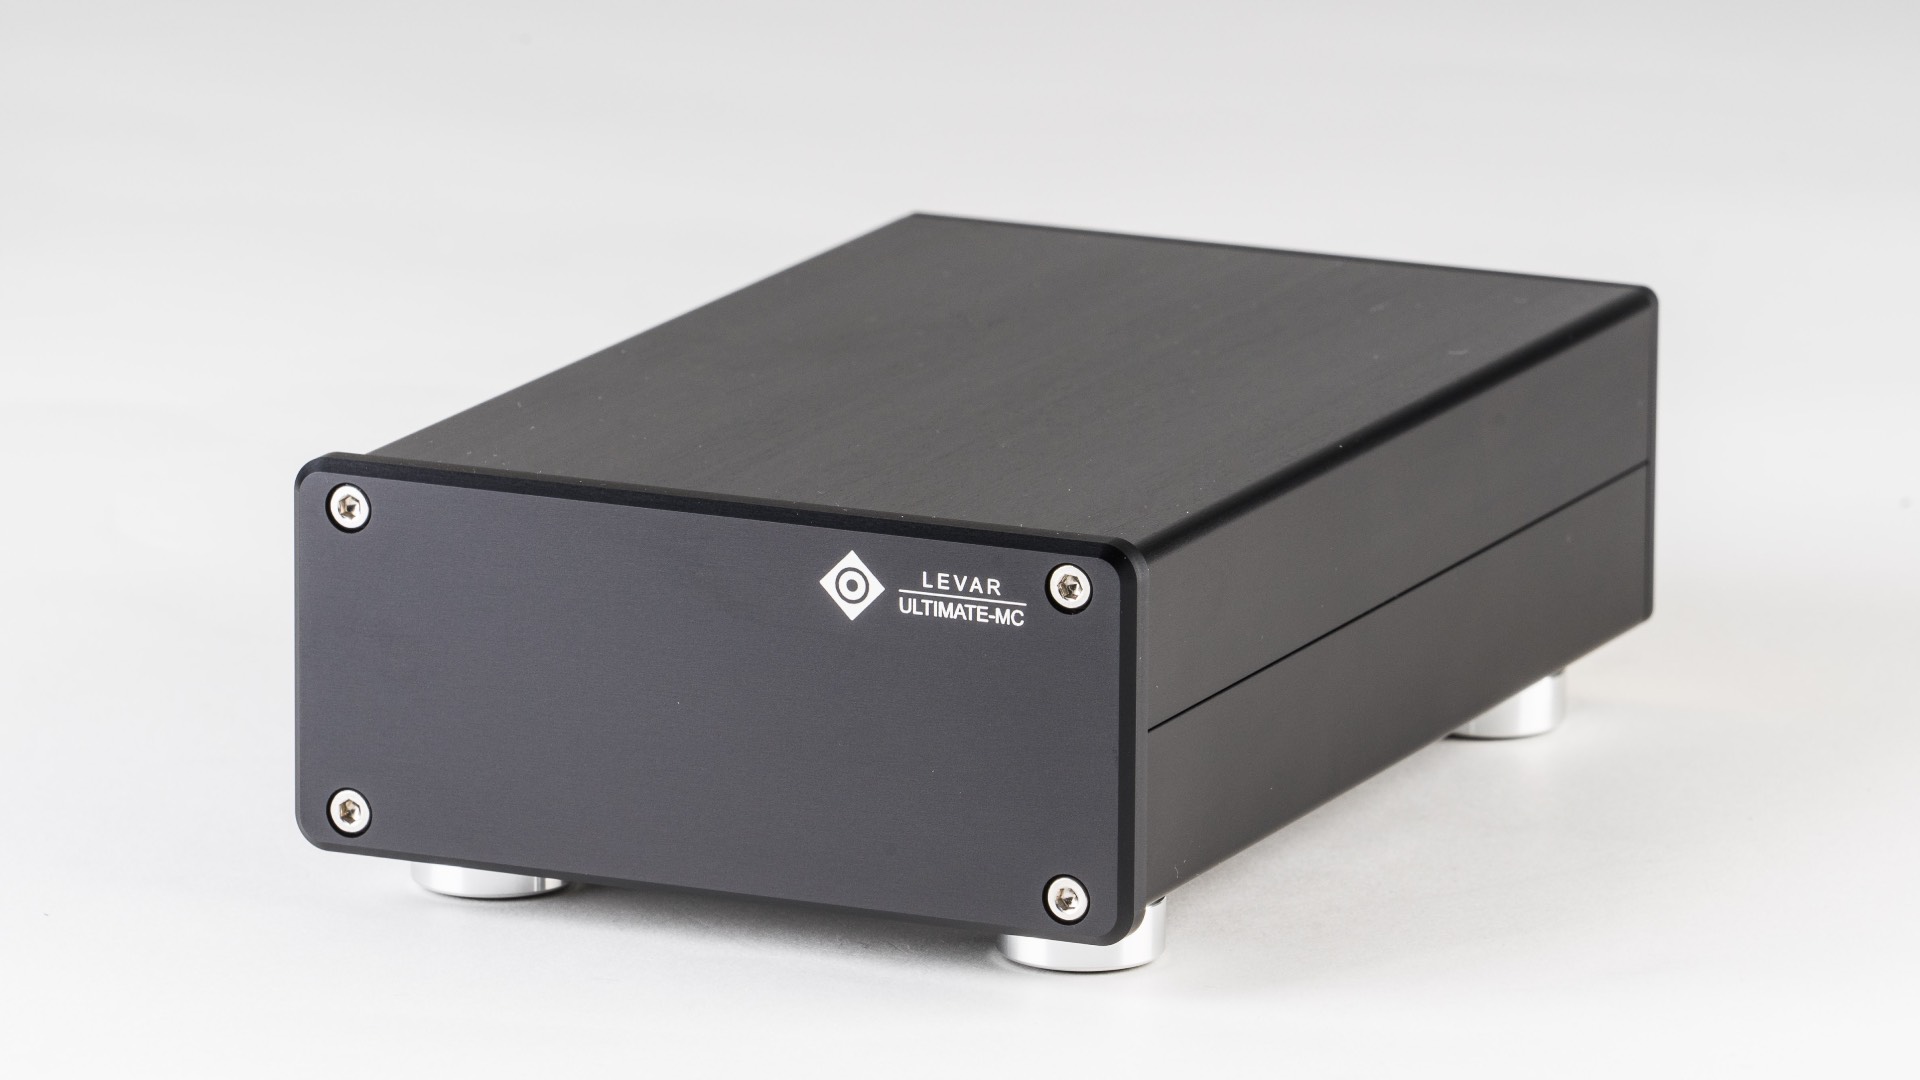 The new Levar MC preamp sits in a compact metal housing. (Image Credit: Levar)